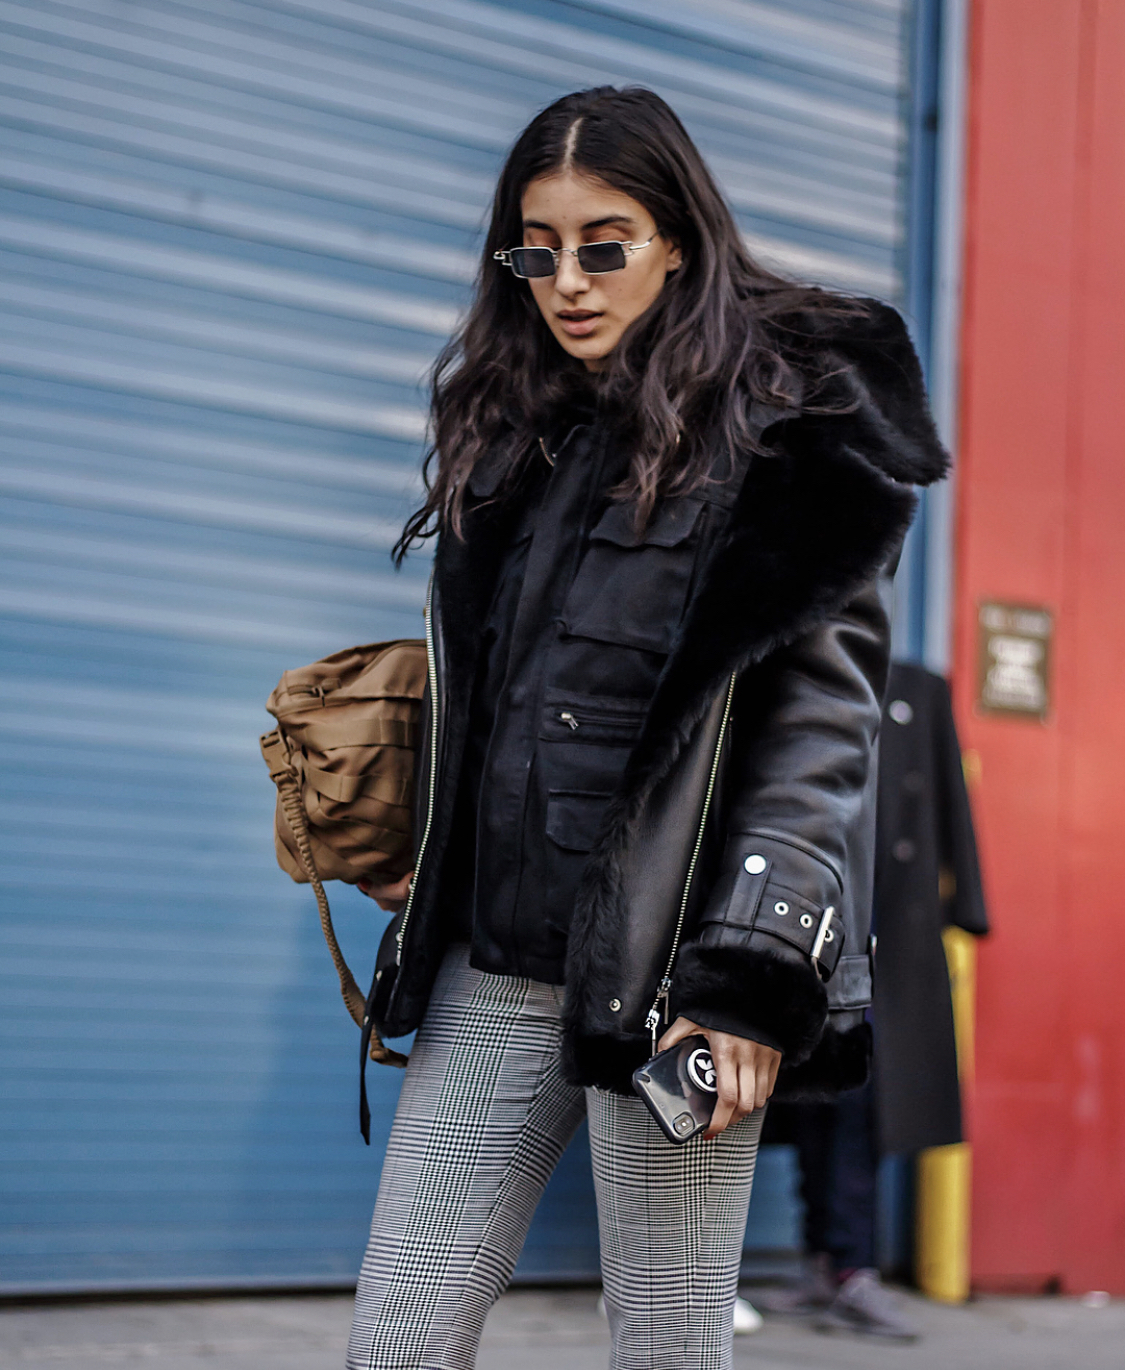 5 Cool New Ways To Wear The Same Old Leather Jacket - Mashion